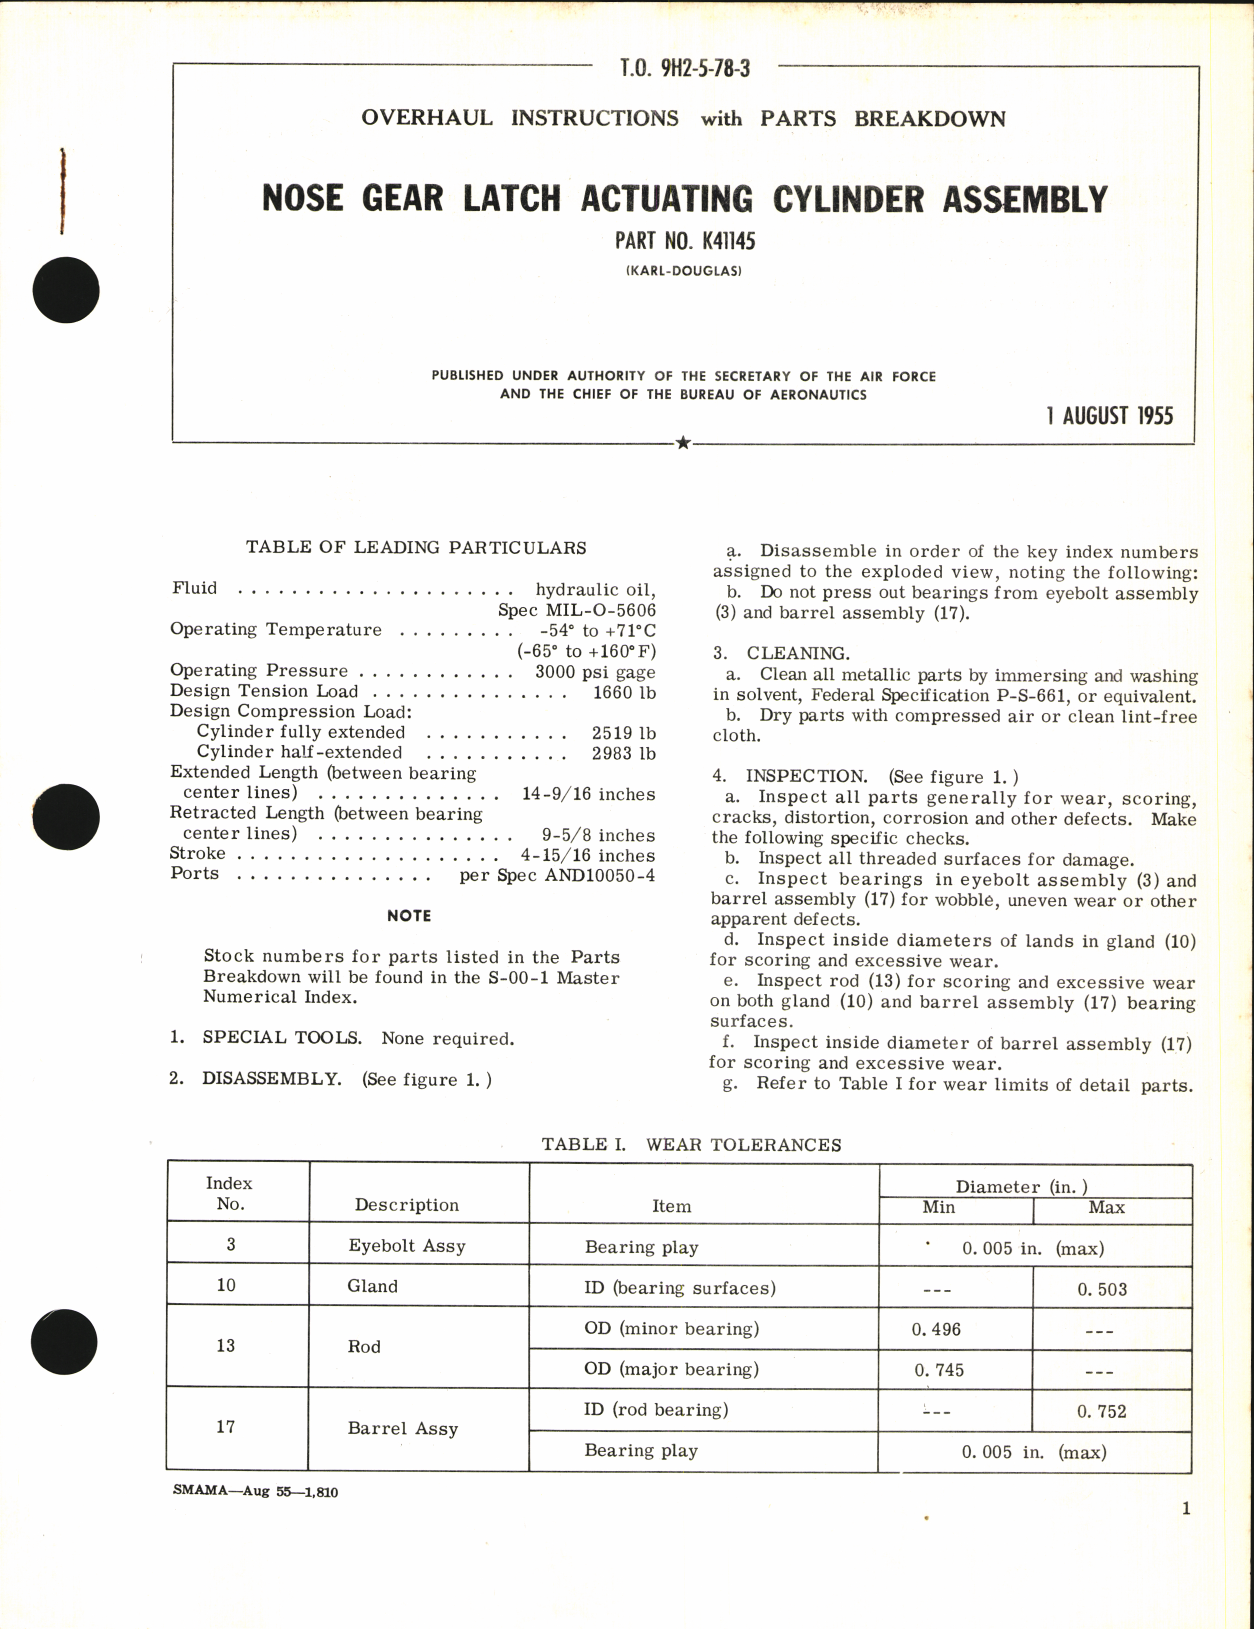 Sample page 1 from AirCorps Library document: Overhaul Instructions with Parts Breakdown for Nose Gear Latch Actuating Cylinder Assembly Part No. K41145